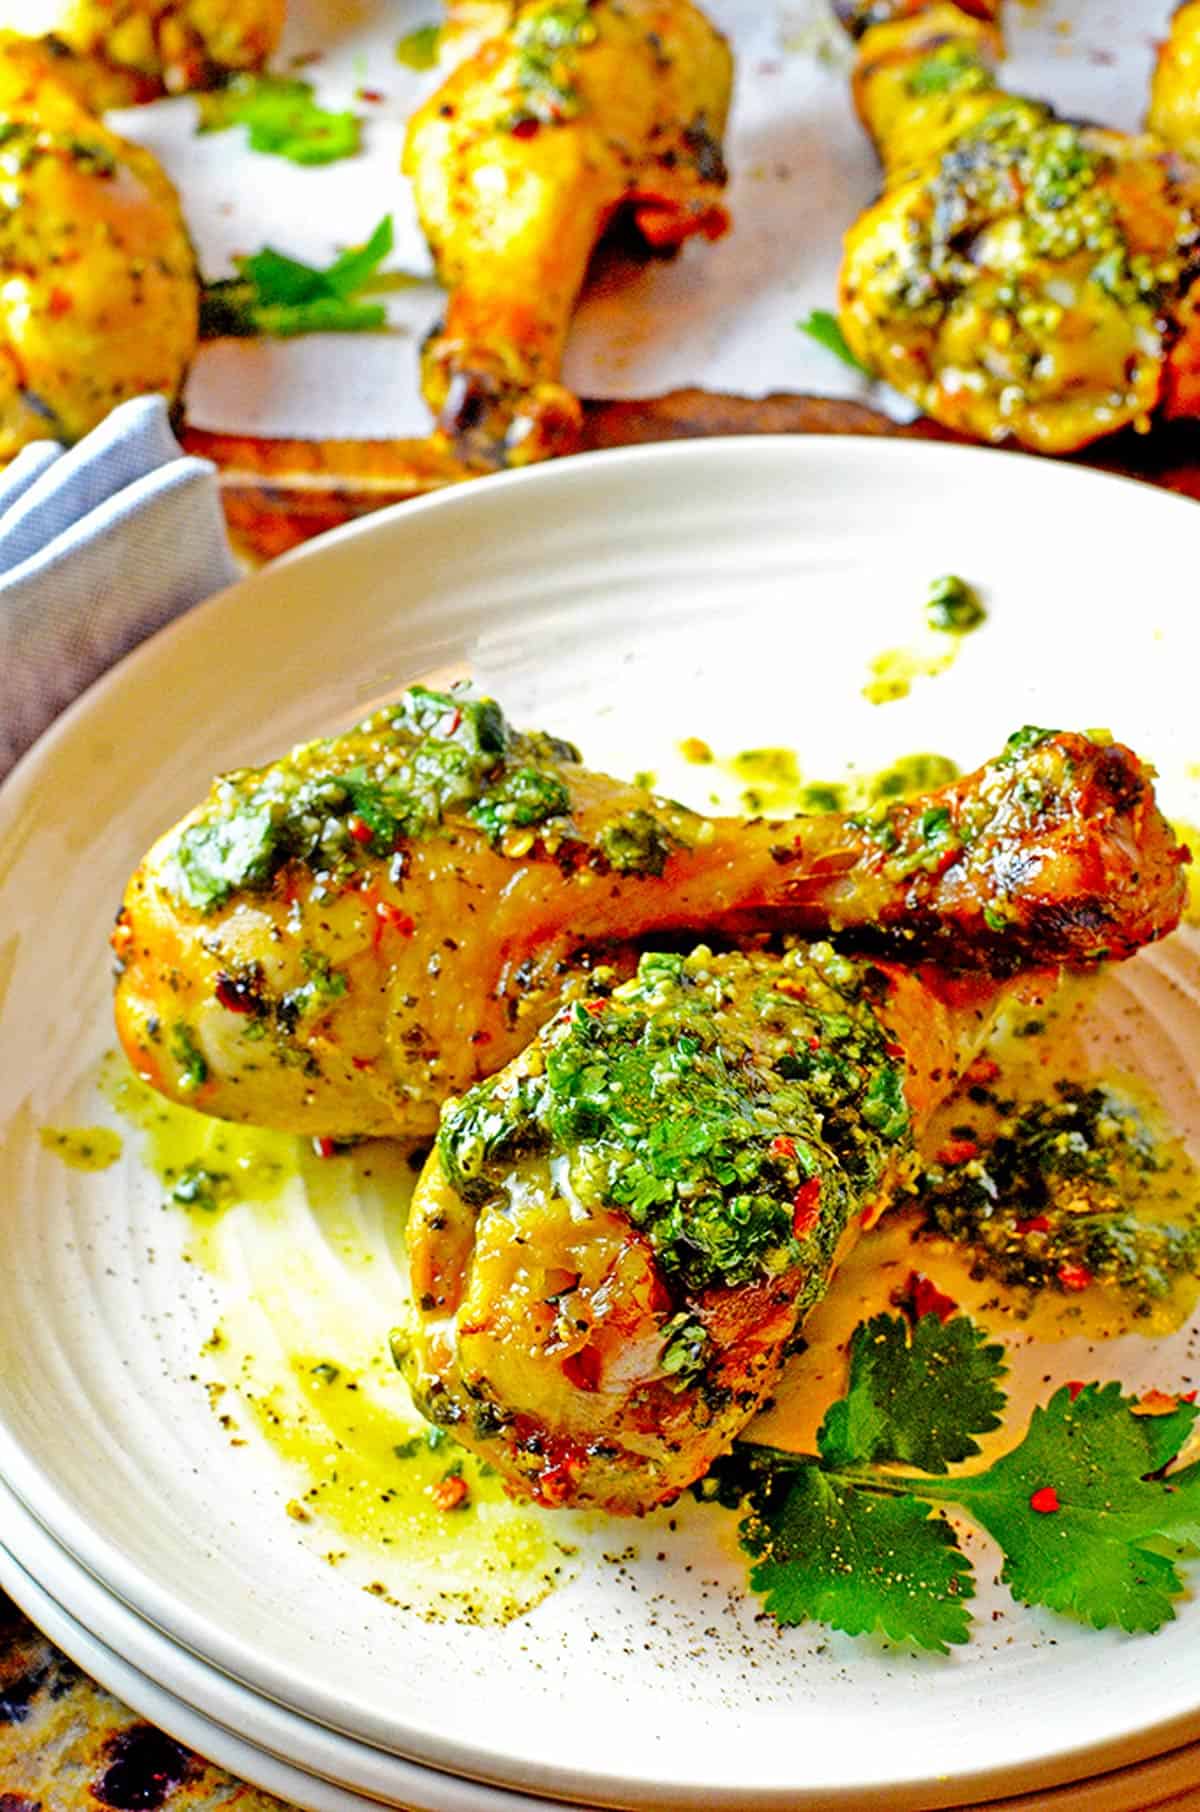 Some chicken drumsticks with chimichurri sauce, on a plate.